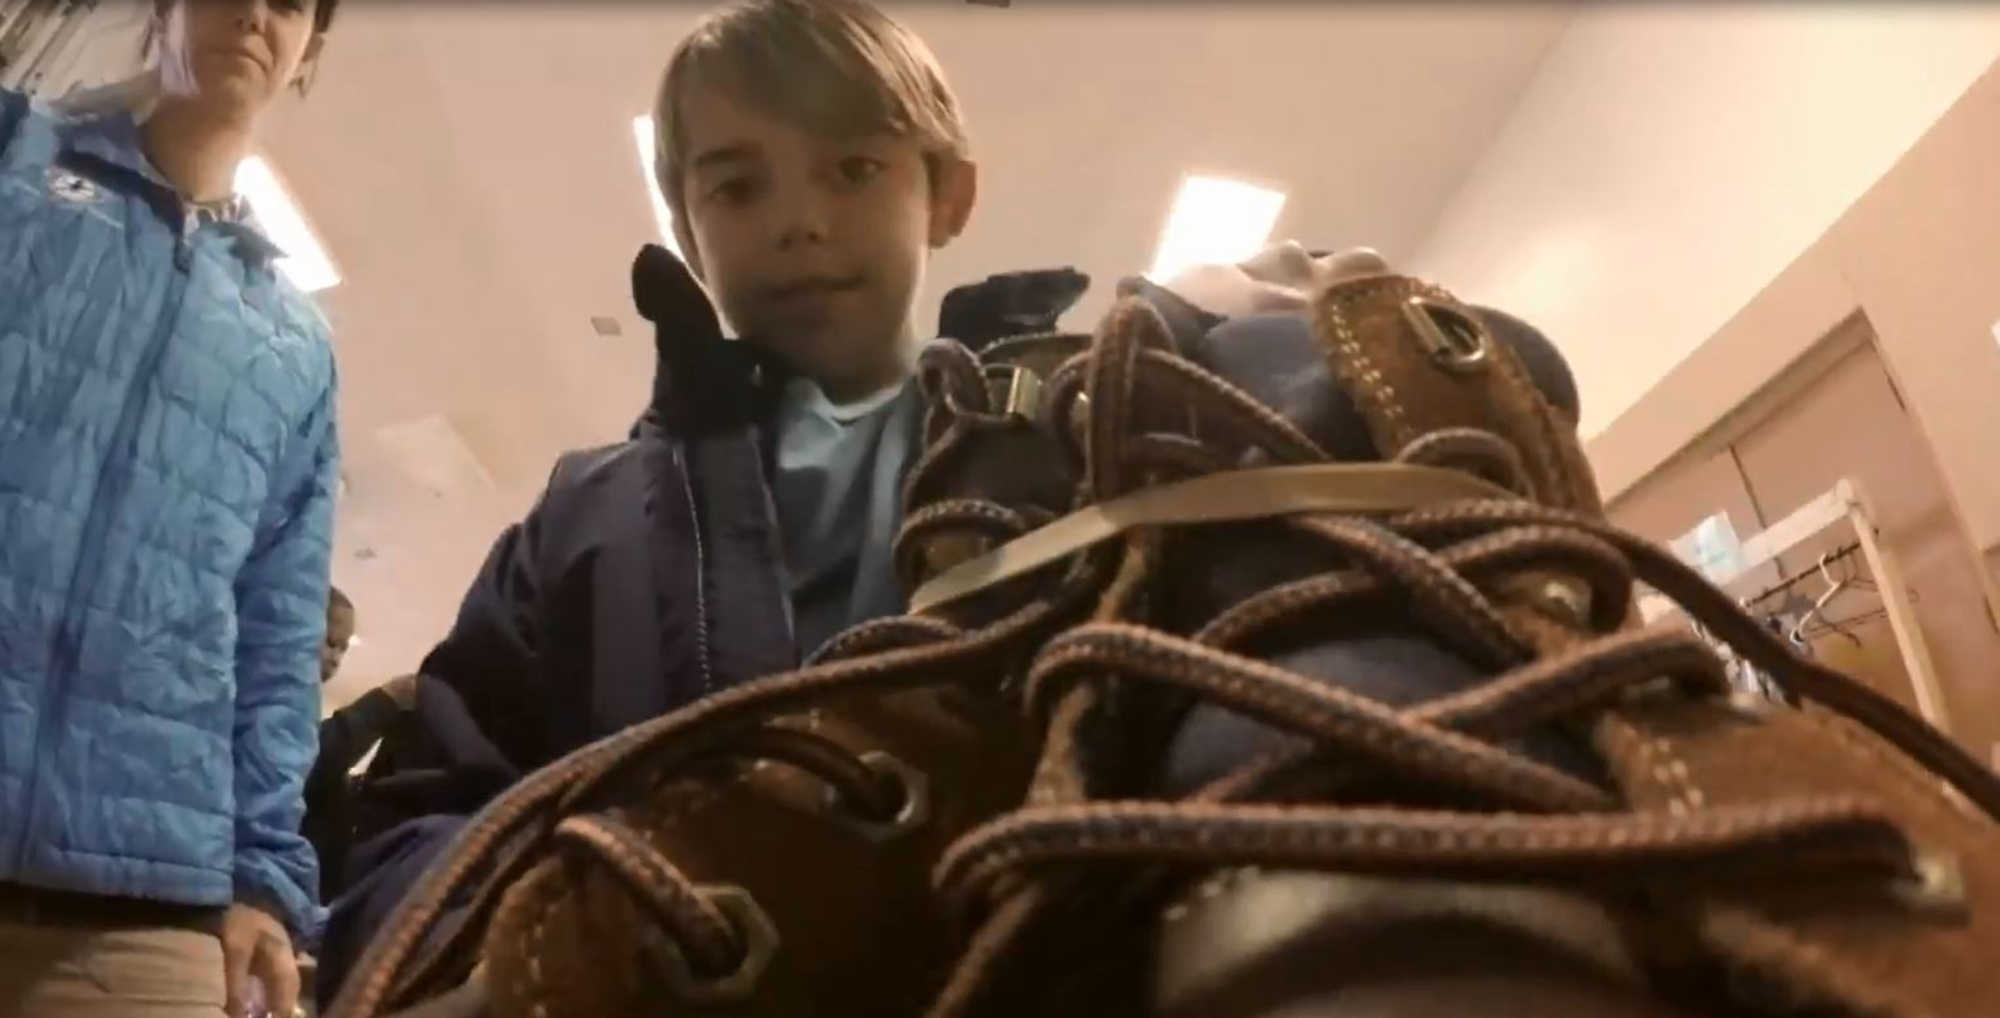 A little boy finds boots that were donated.